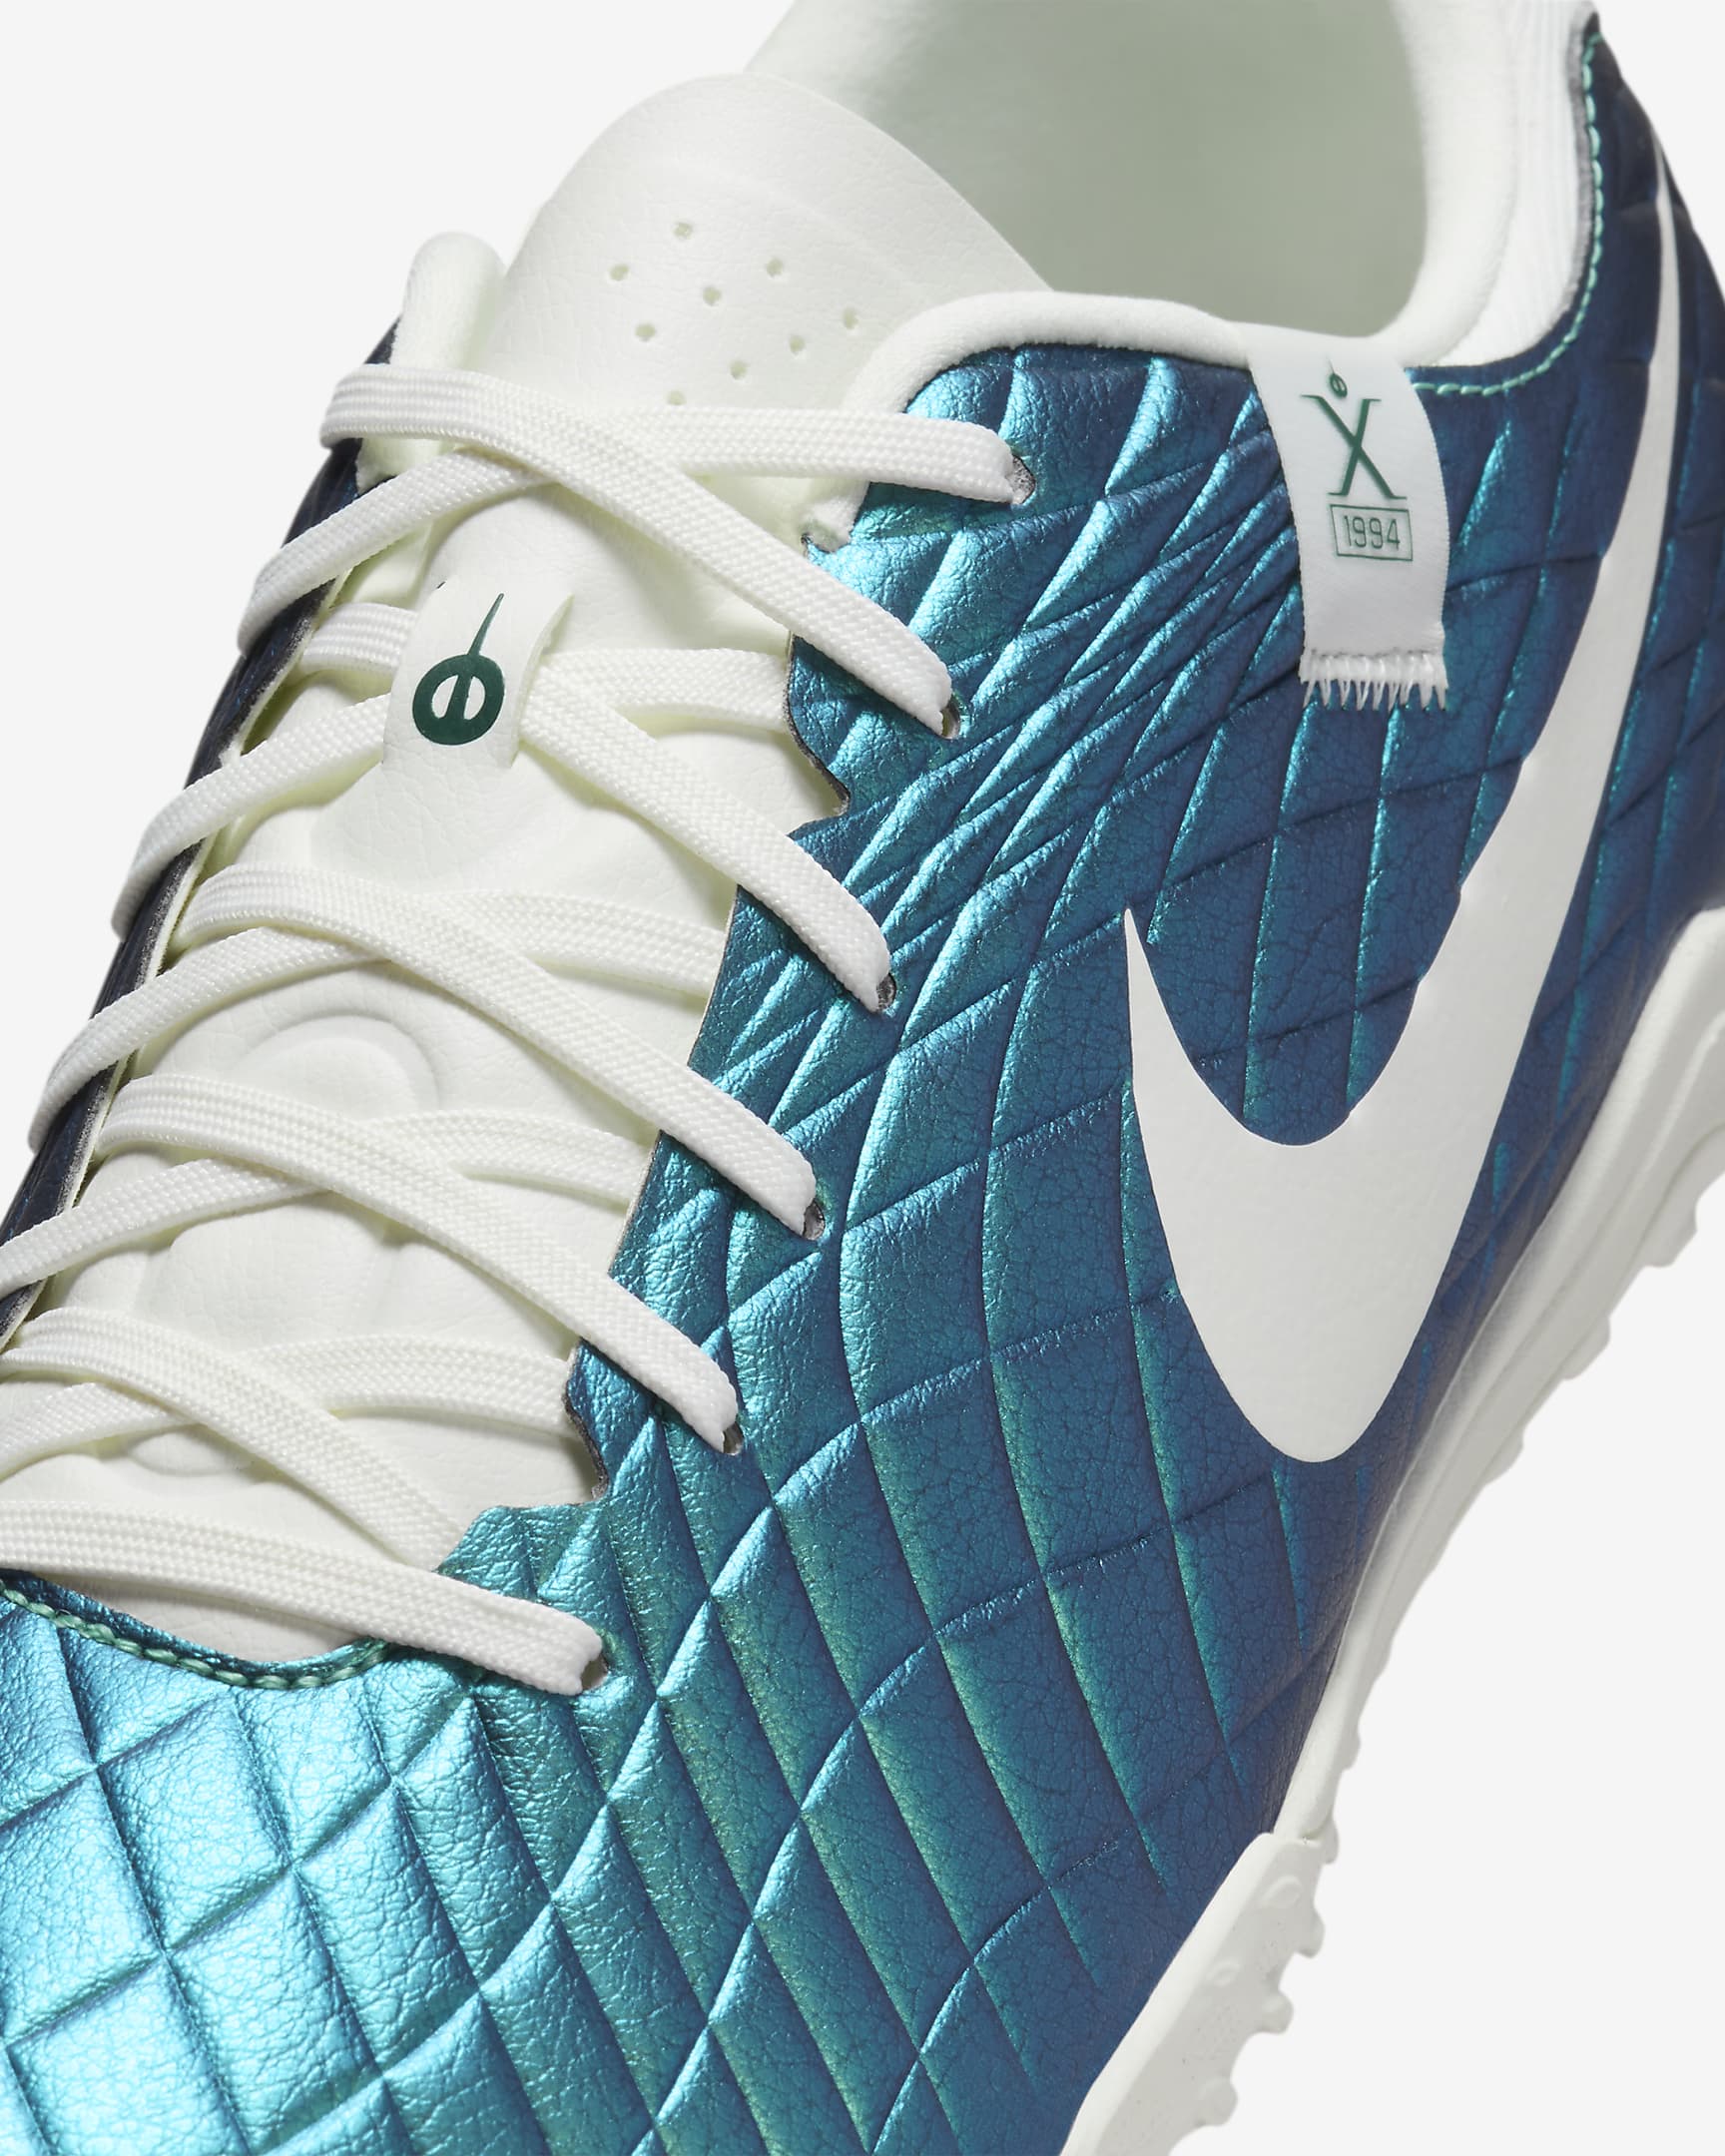 Nike Tiempo Emerald Legend 10 Academy TF Low-Top Football Shoes - Dark Atomic Teal/Sail